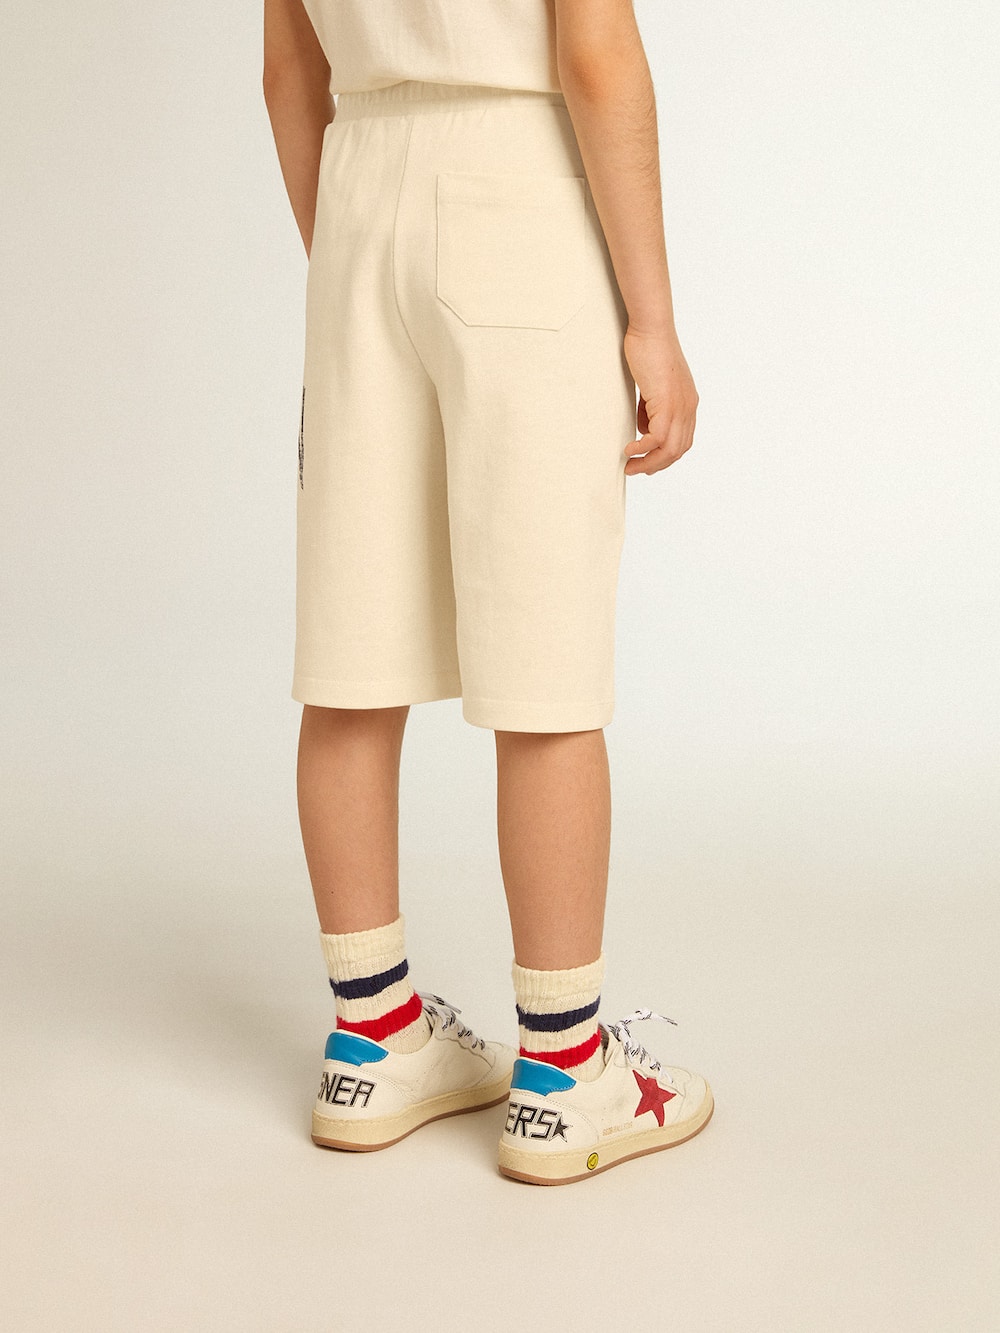 Golden Goose - Boys’ Bermuda shorts in aged white with print on the front  in 